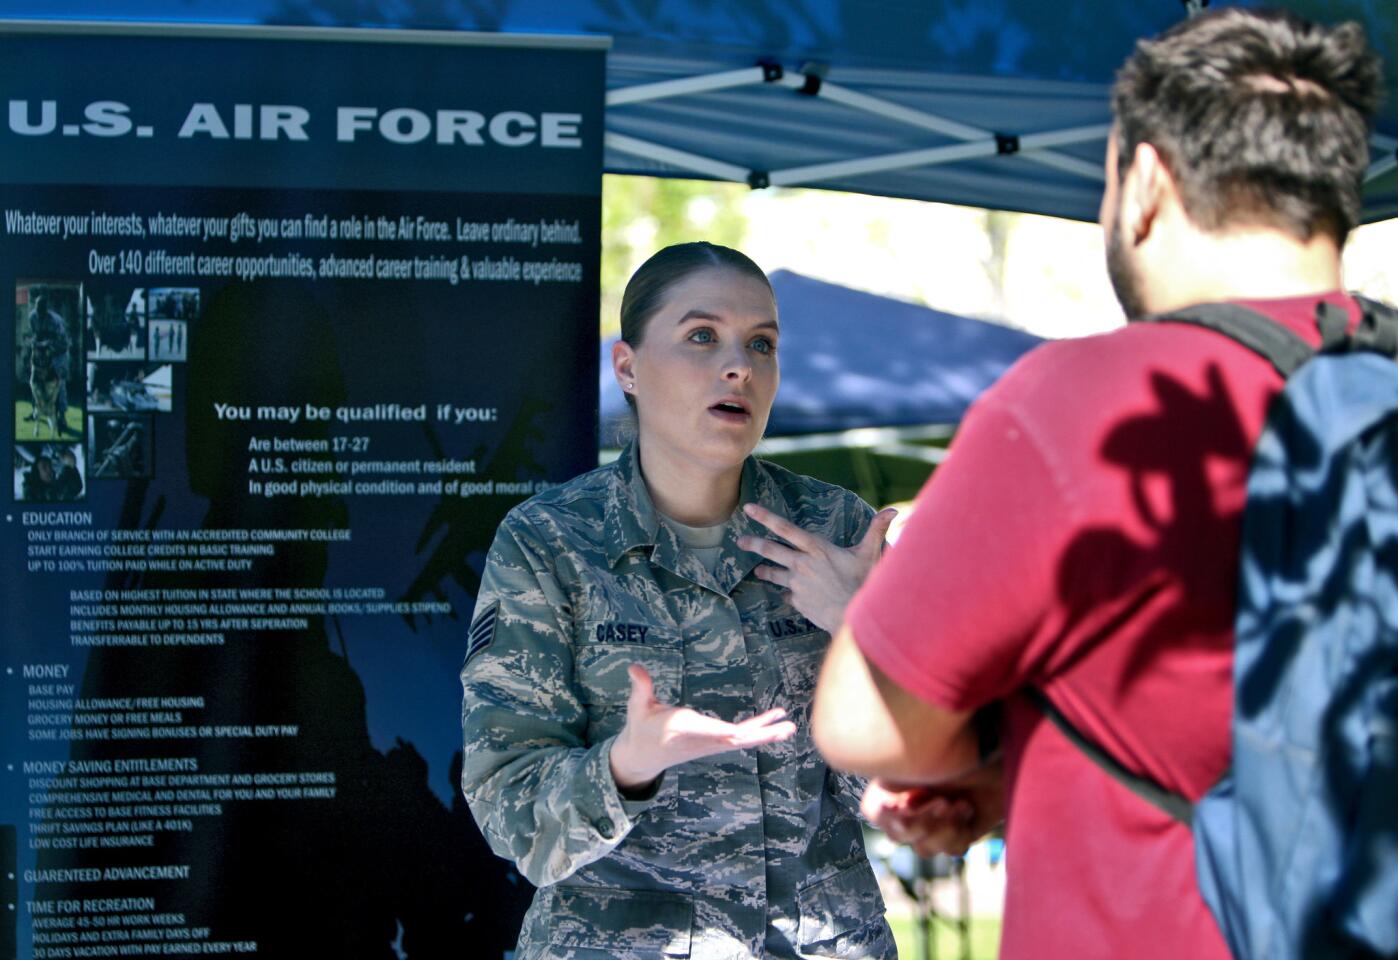 Photo Gallery: Glendale College holds annual Spring Job Fair on campus